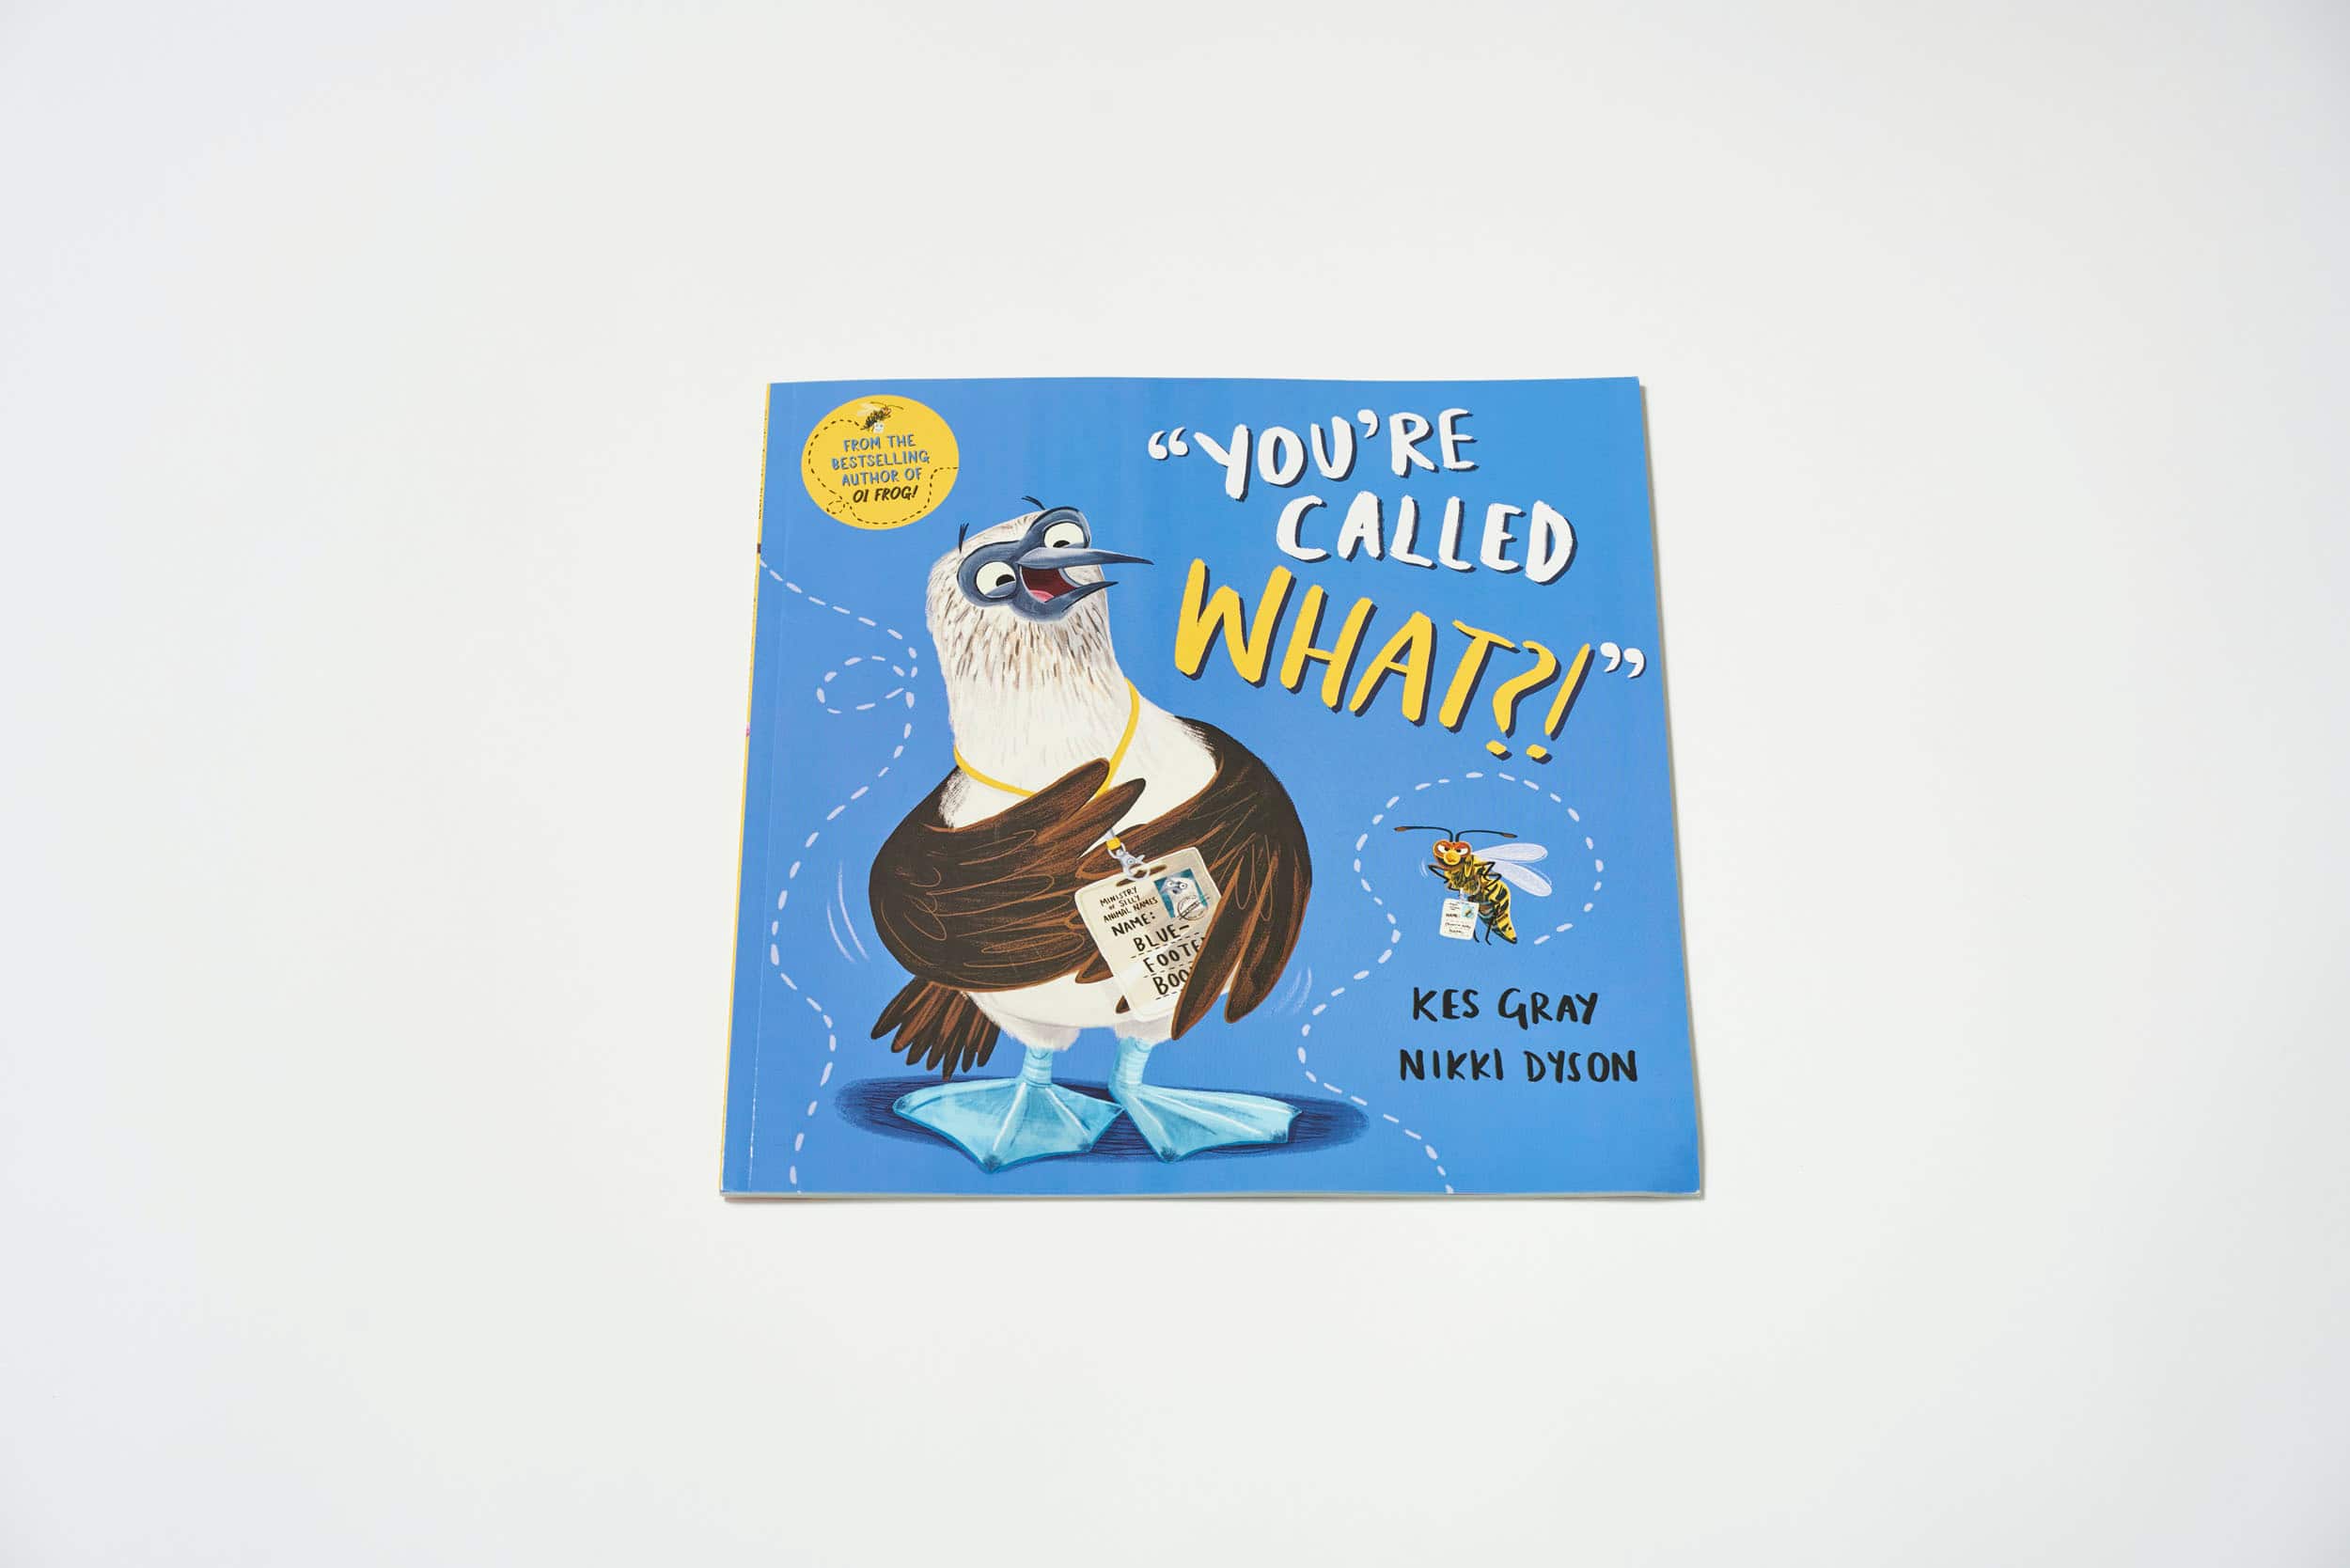 Image of a book called 'You're Called What?!' with an illustration of a pigeon on the cover.